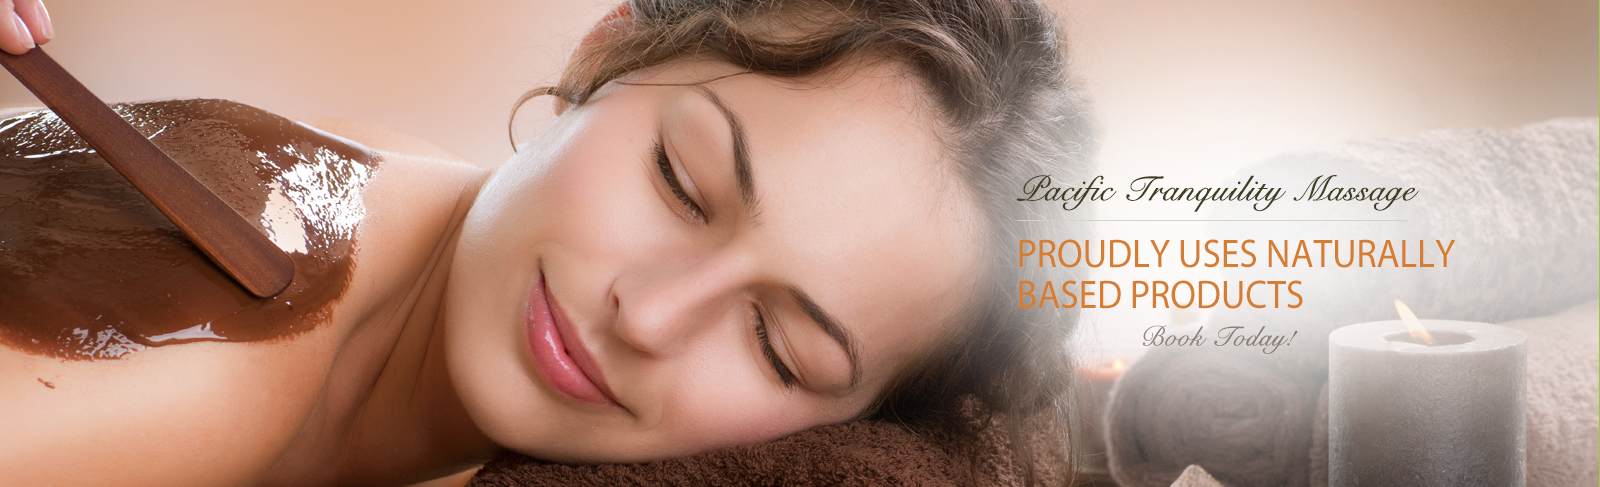 Pacific Tranquility Massage Refer a FRIEND and receive $10 OFF your next visit